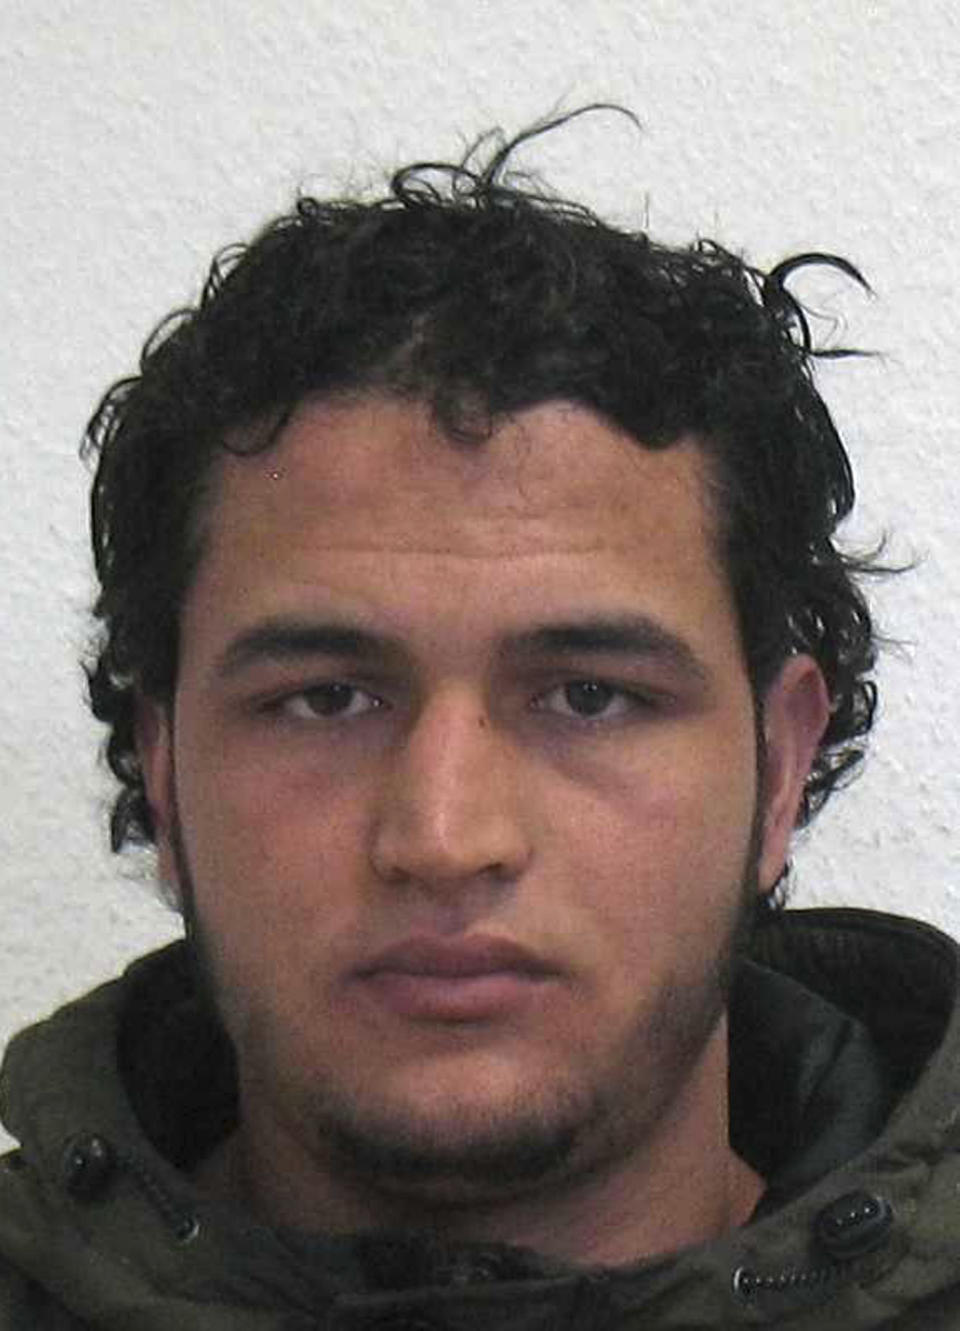 The wanted photo issued by German federal police on Wednesday, Dec. 21, 2016 shows 24-year-old Tunisian Anis Amri who is suspected of being involved in the fatal attack on the Christmas market in Berlin on Dec. 19, 2016. The Tunisian man suspected of driving a truck into a crowded Christmas market in Berlin was killed early Friday Dec. 23, 2016 in a shootout with police in Milan, ending a Europe-wide manhunt, Italy's interior minister said.(German police via AP)